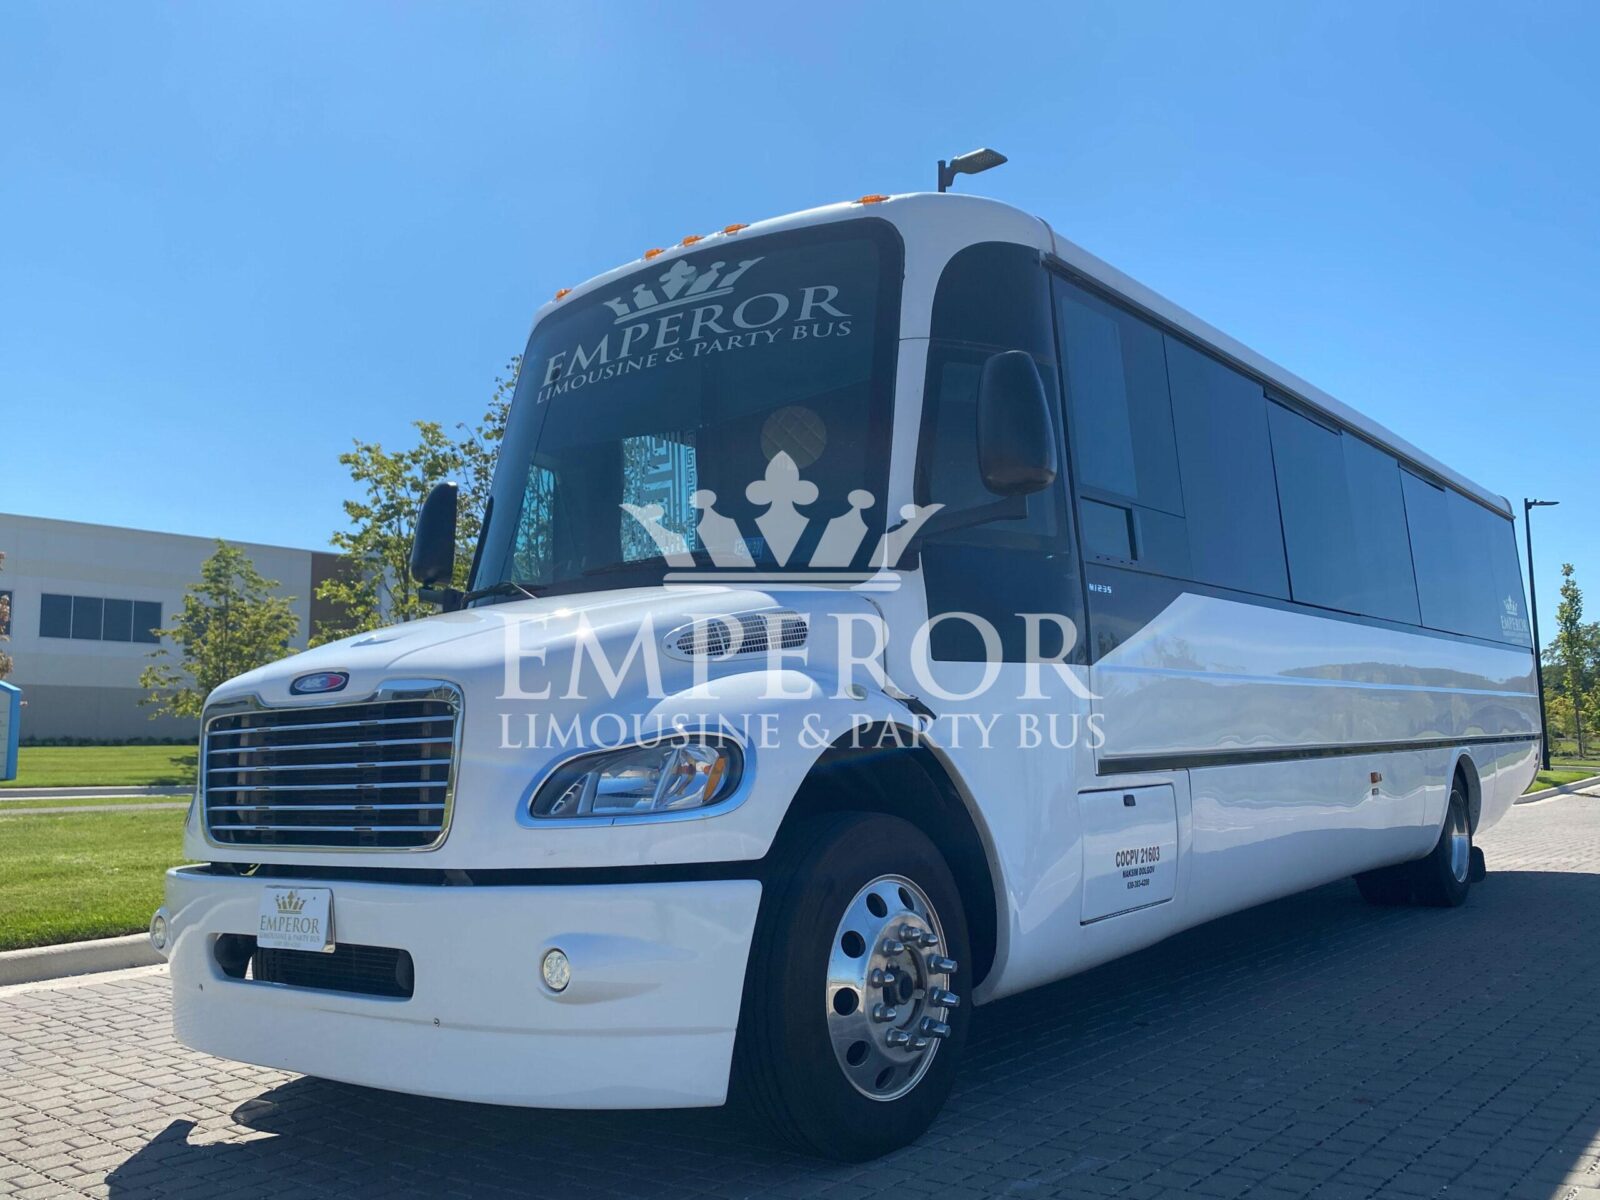 Party bus rental service in Glendale Heights